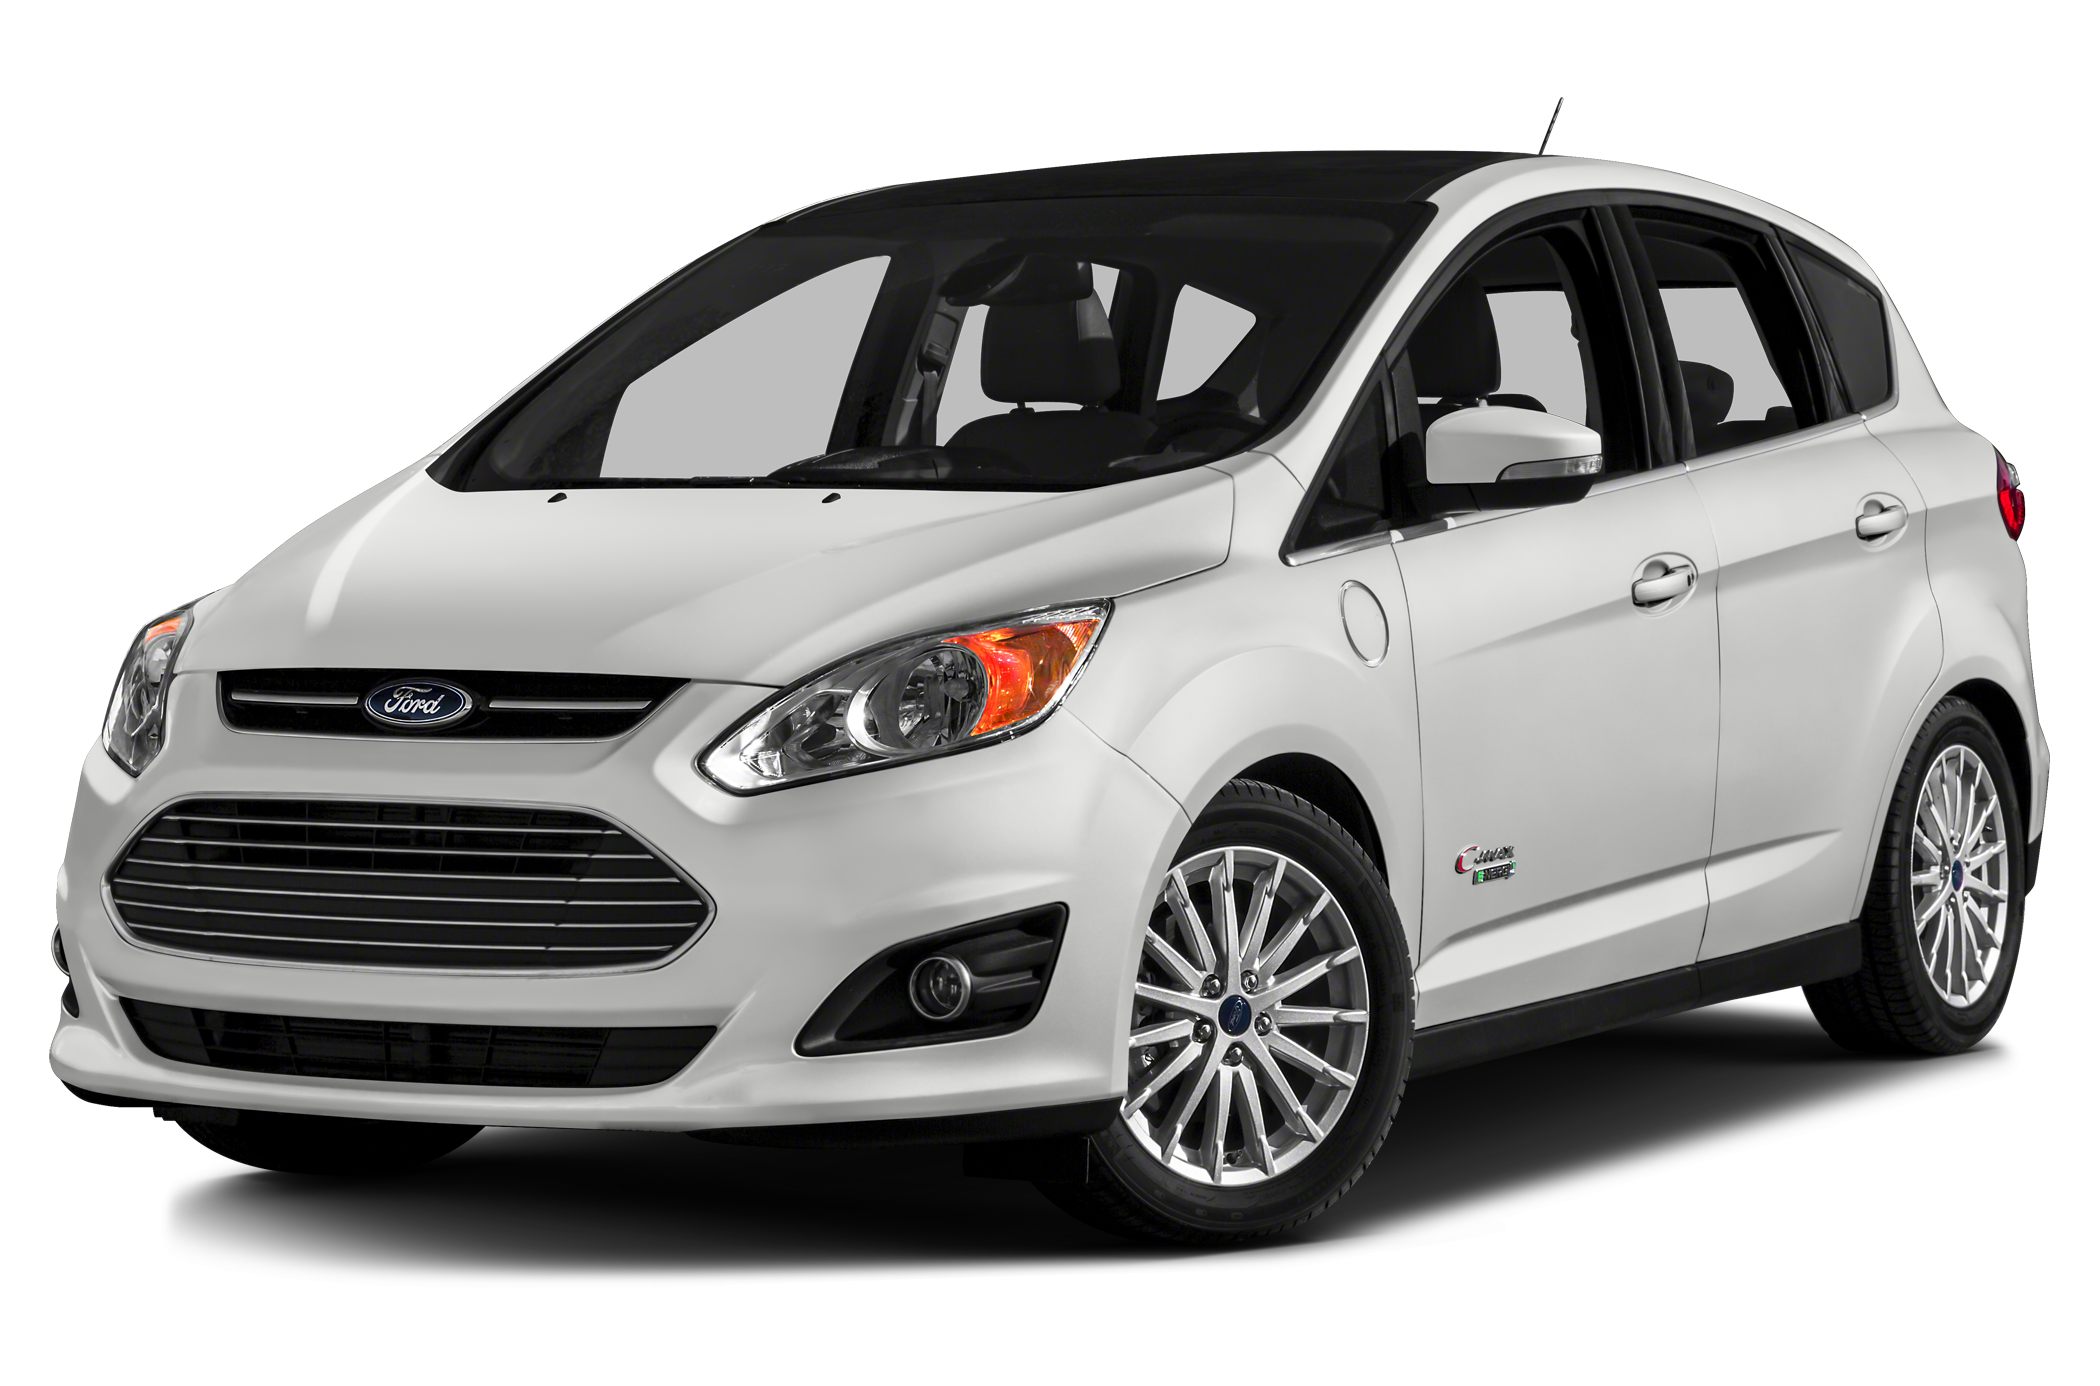 2017 Ford C-Max Hybrid Deals, Prices, Incentives & Leases, Overview - CarsDirect